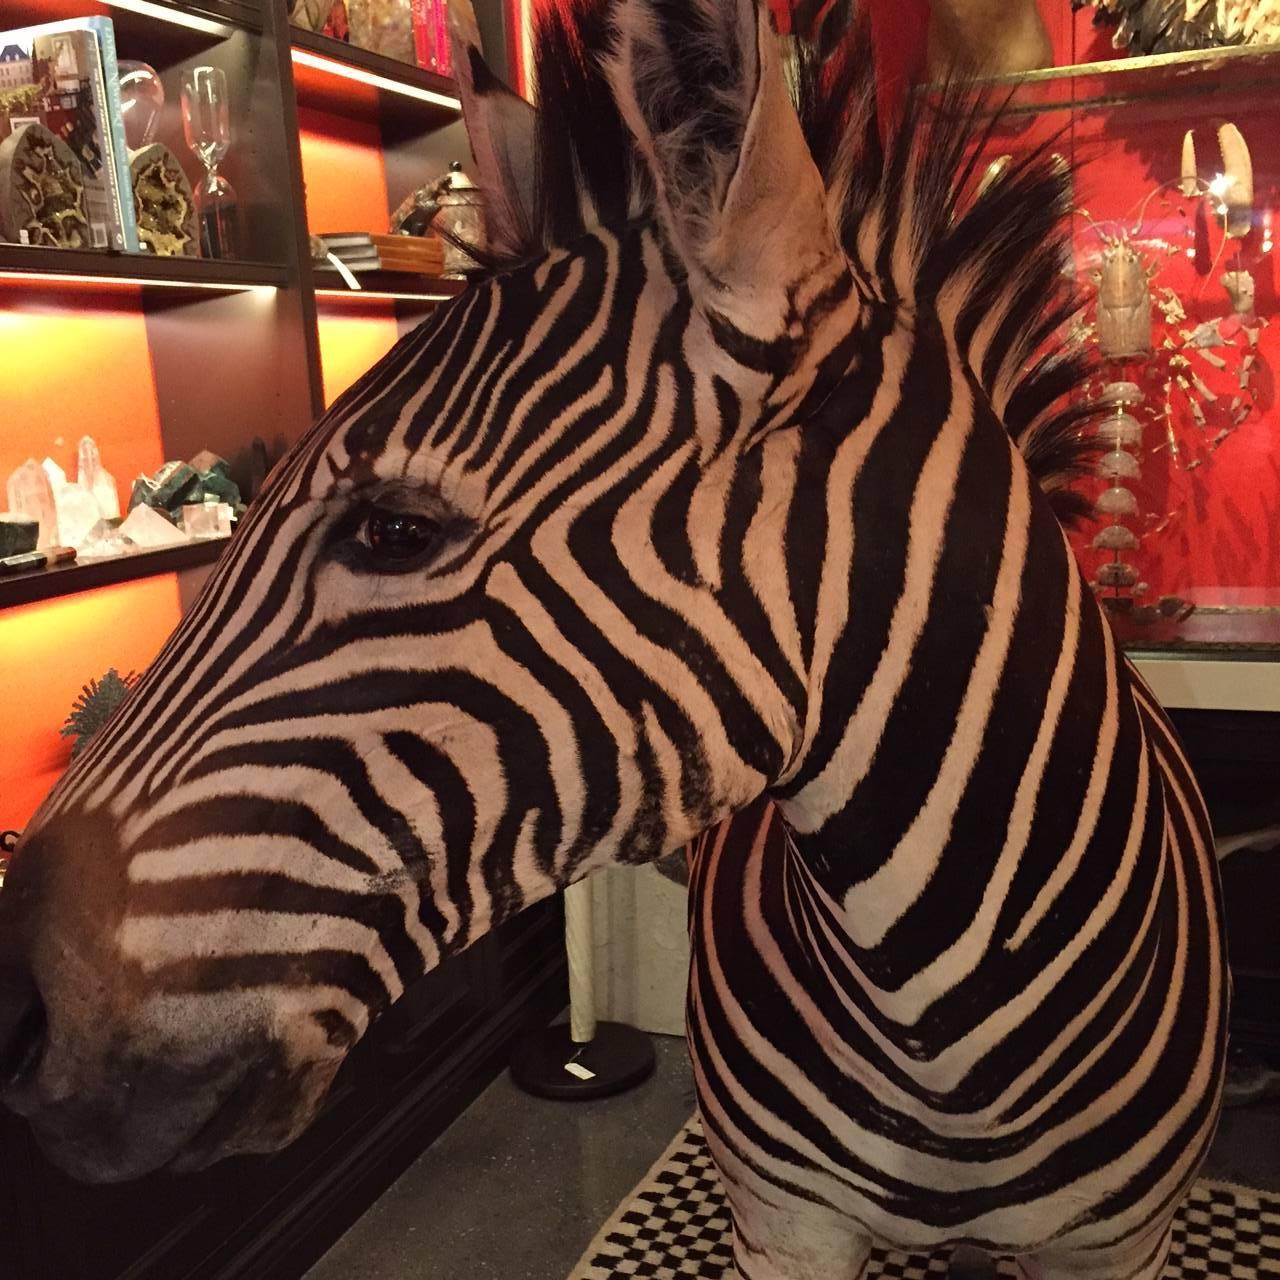 Full mount freestanding taxidermied Burchell's Zebra (Equus quagga burchellii) from South Africa.
Burchell's zebra is a southern African subspecies of the plains zebra. It was named after the British explorer and naturalist William John Burchell.